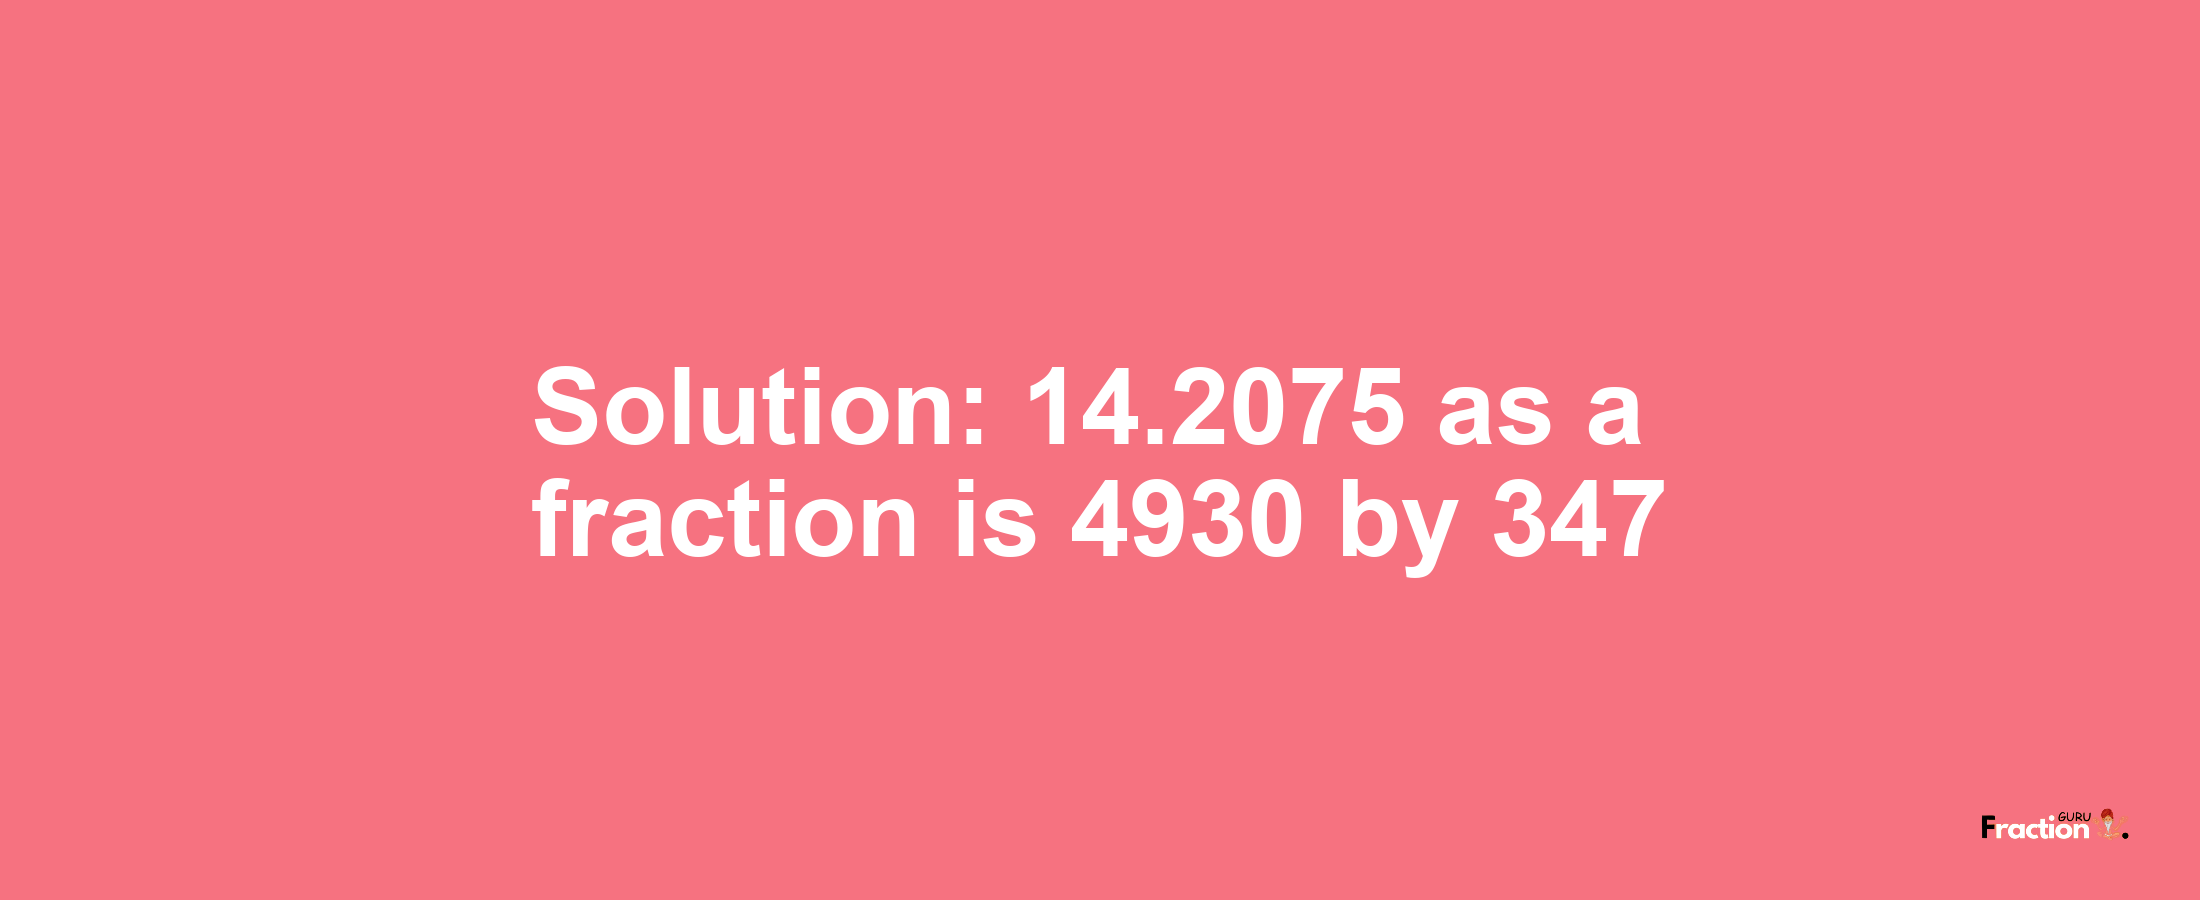 Solution:14.2075 as a fraction is 4930/347